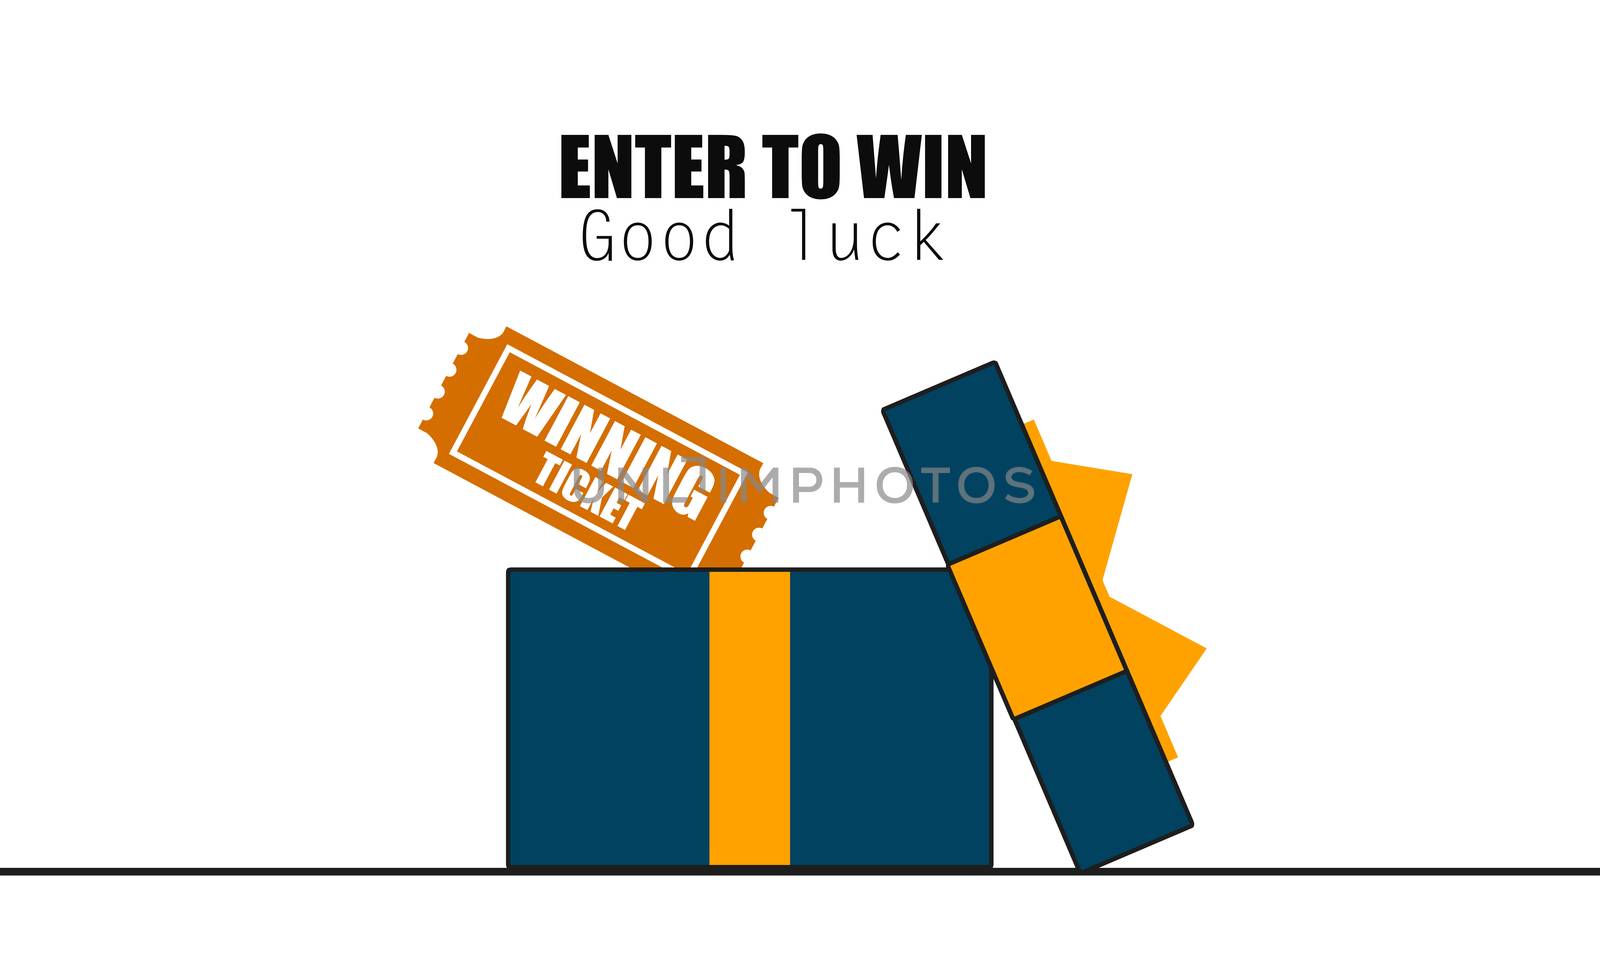 Prize box opening with enter to win word, 3d rendering